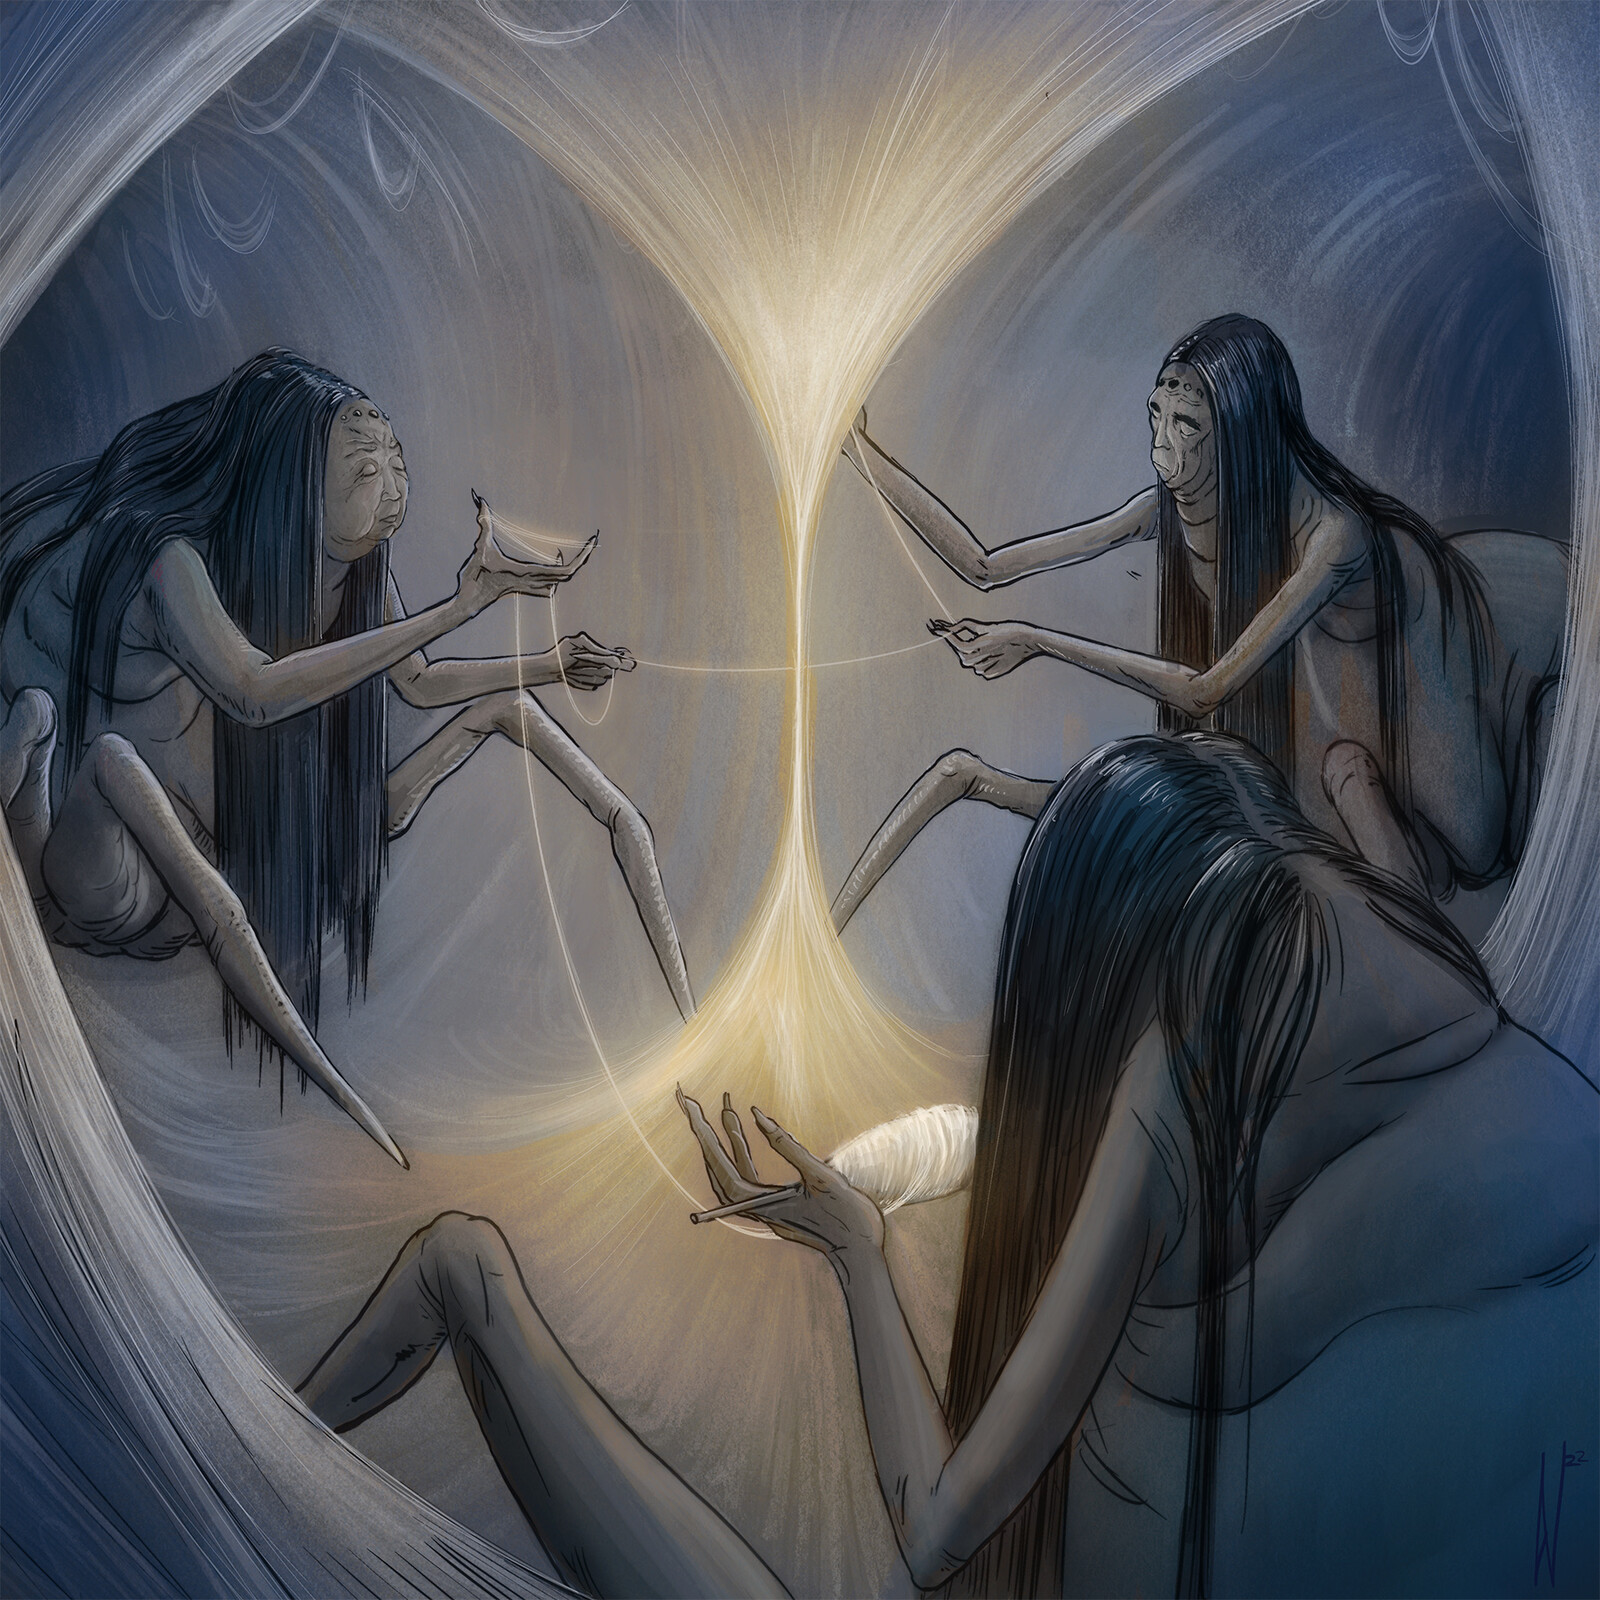 Time Keeper - Inspired by the Norns from Norse mythology, as well as the Greek Moirs (called Parsees by the Romans). Here are my spider creatures that I developed some time ago and now spin the threads of fate. 